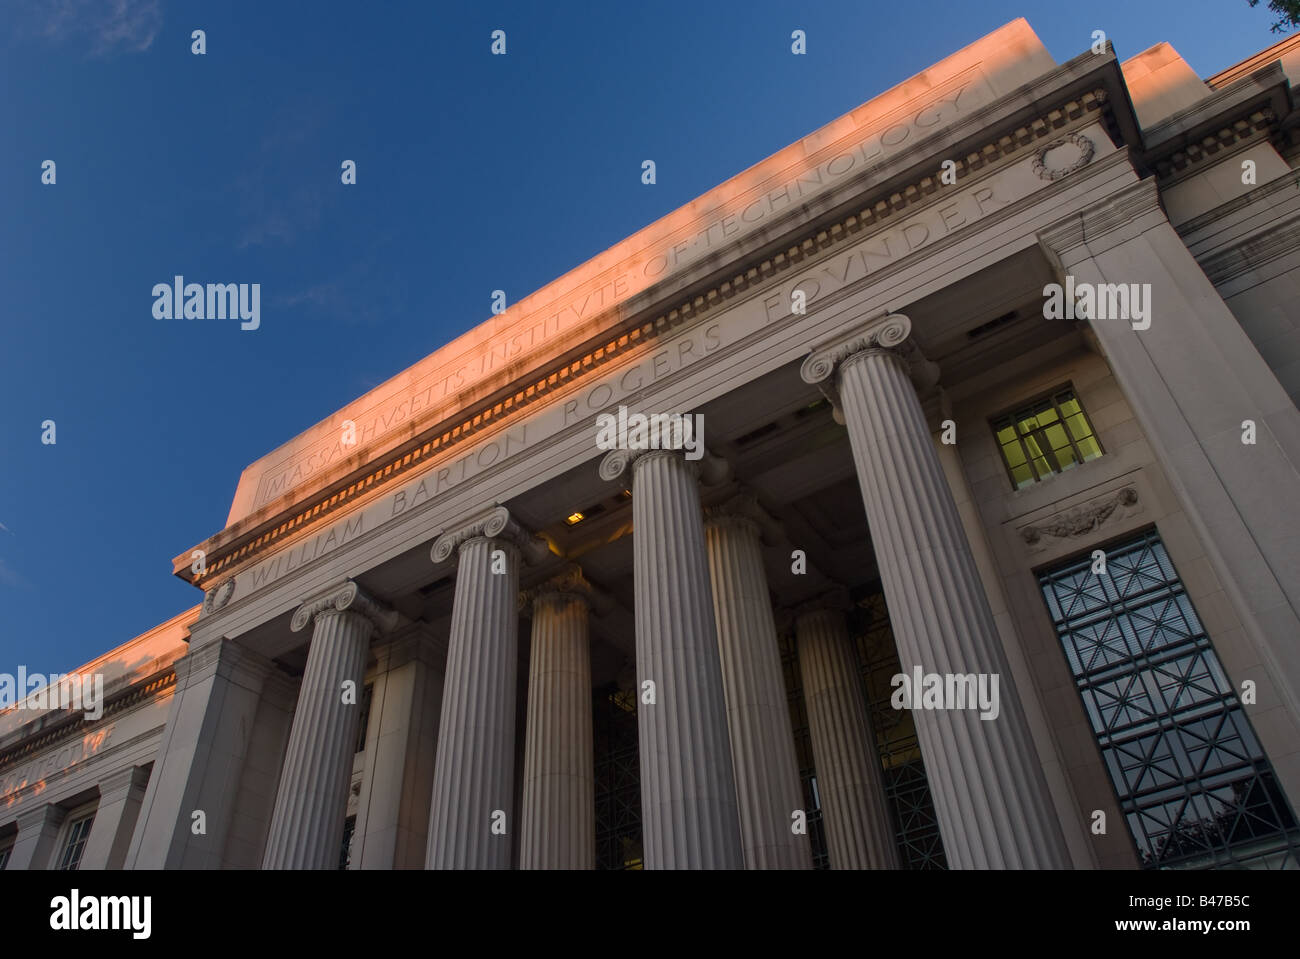 The facade of Lobby 7 the main entrance to the Massachusetts Institute of Technology campus in Cambridge MA as seen on 9 17 08 Stock Photo